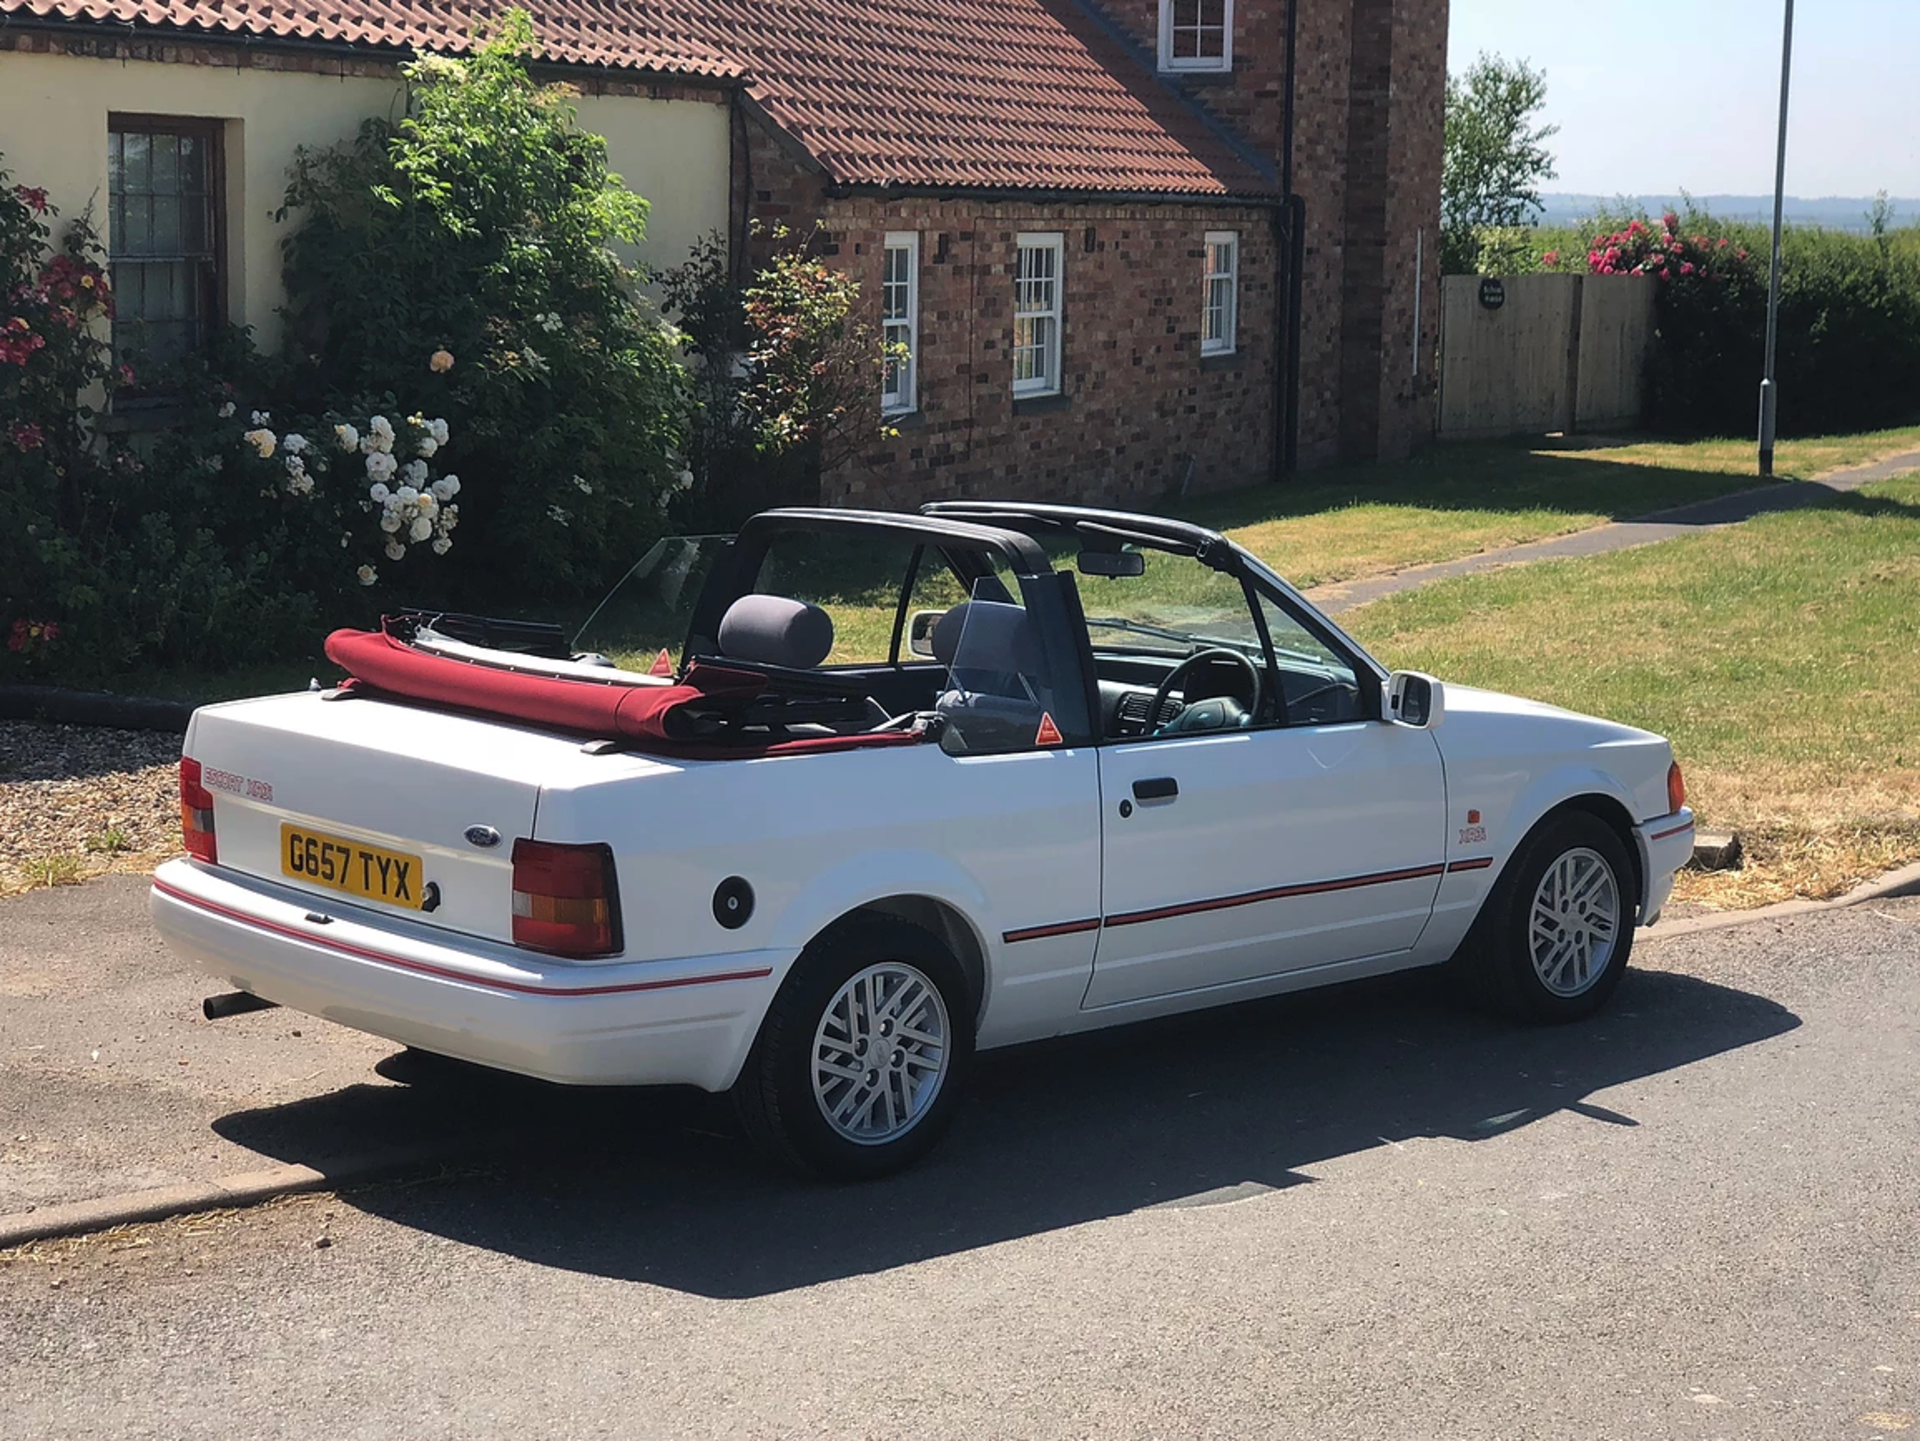 1989 Ford Escort XR3i Convertible - Image 5 of 13